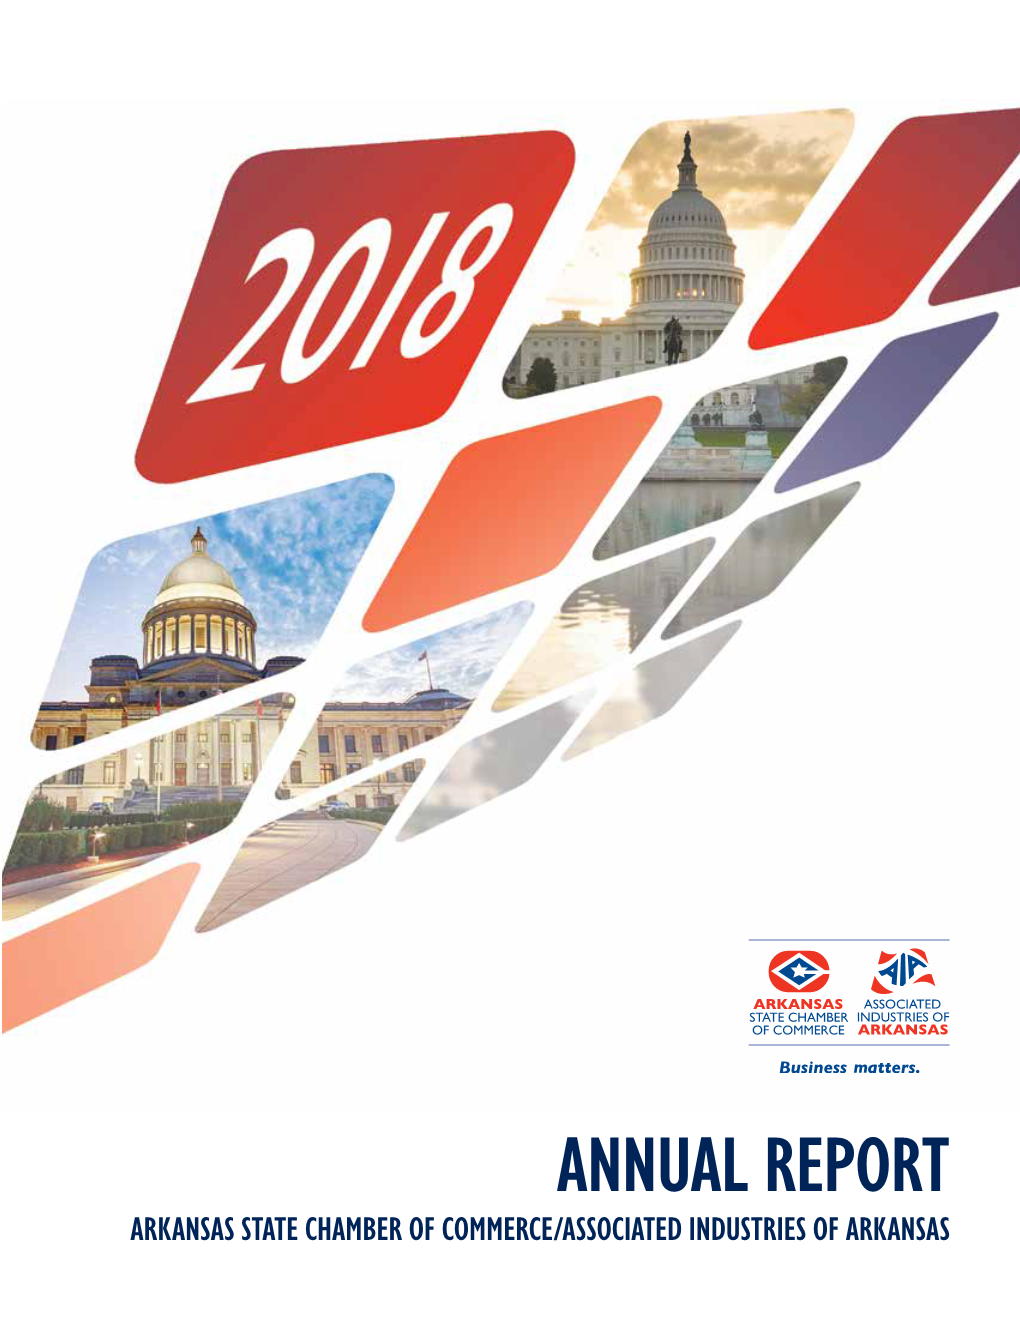 Annual Report Arkansas State Chamber of Commerce/Associated Industries of Arkansas